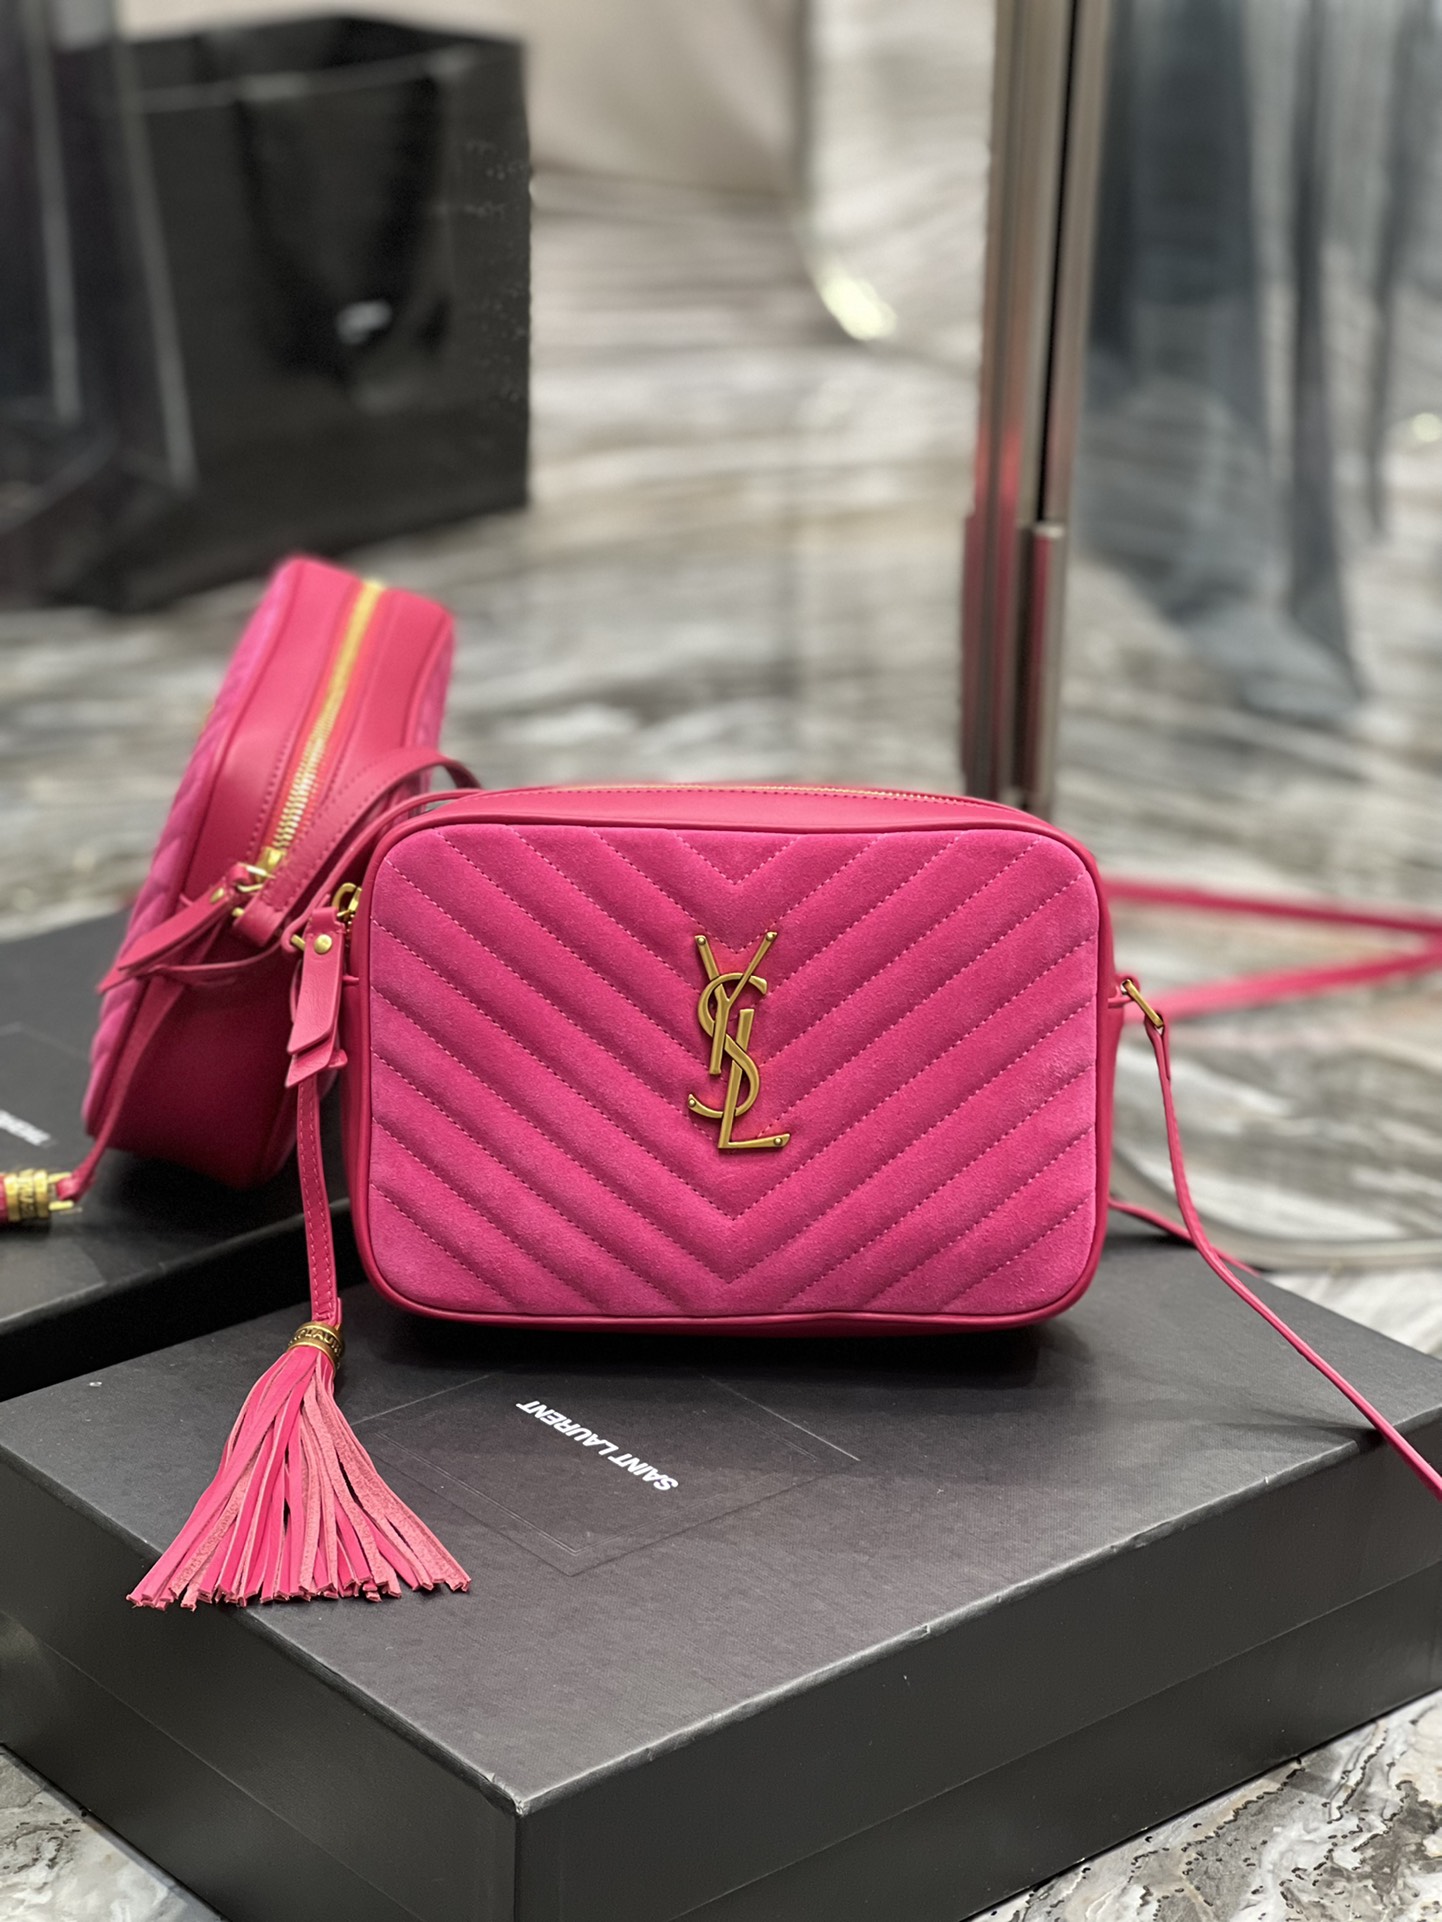 2018 Saint Laurent LOU Camera Bag in HOT PINK Suede leather